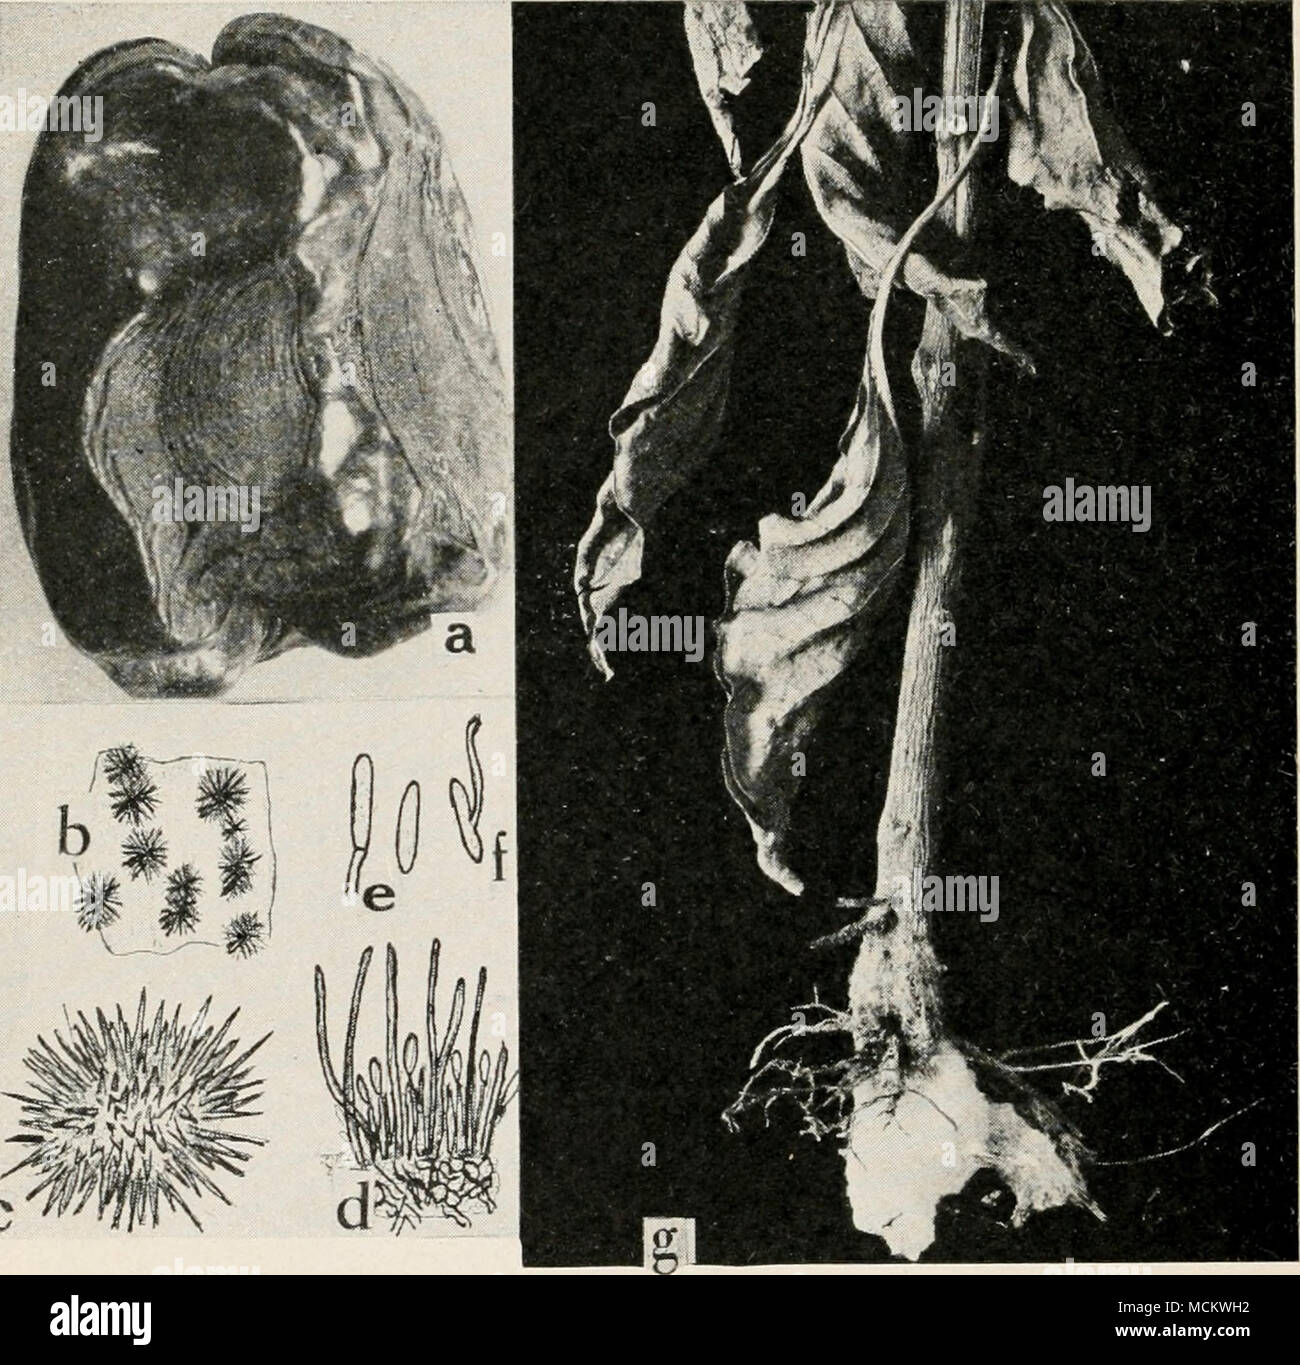 . Fig. 57. Diseases of the Pepper. a. Anthracnose on fruit, b. anthracnose spot showing acervuli, c. acervulus greatly magnified, d. section through acervulus of Glomerella piperata, showing seta?, conidiophores, and conidia, e. conidia, /. germinating conidium, g. Southern blight. Stock Photo